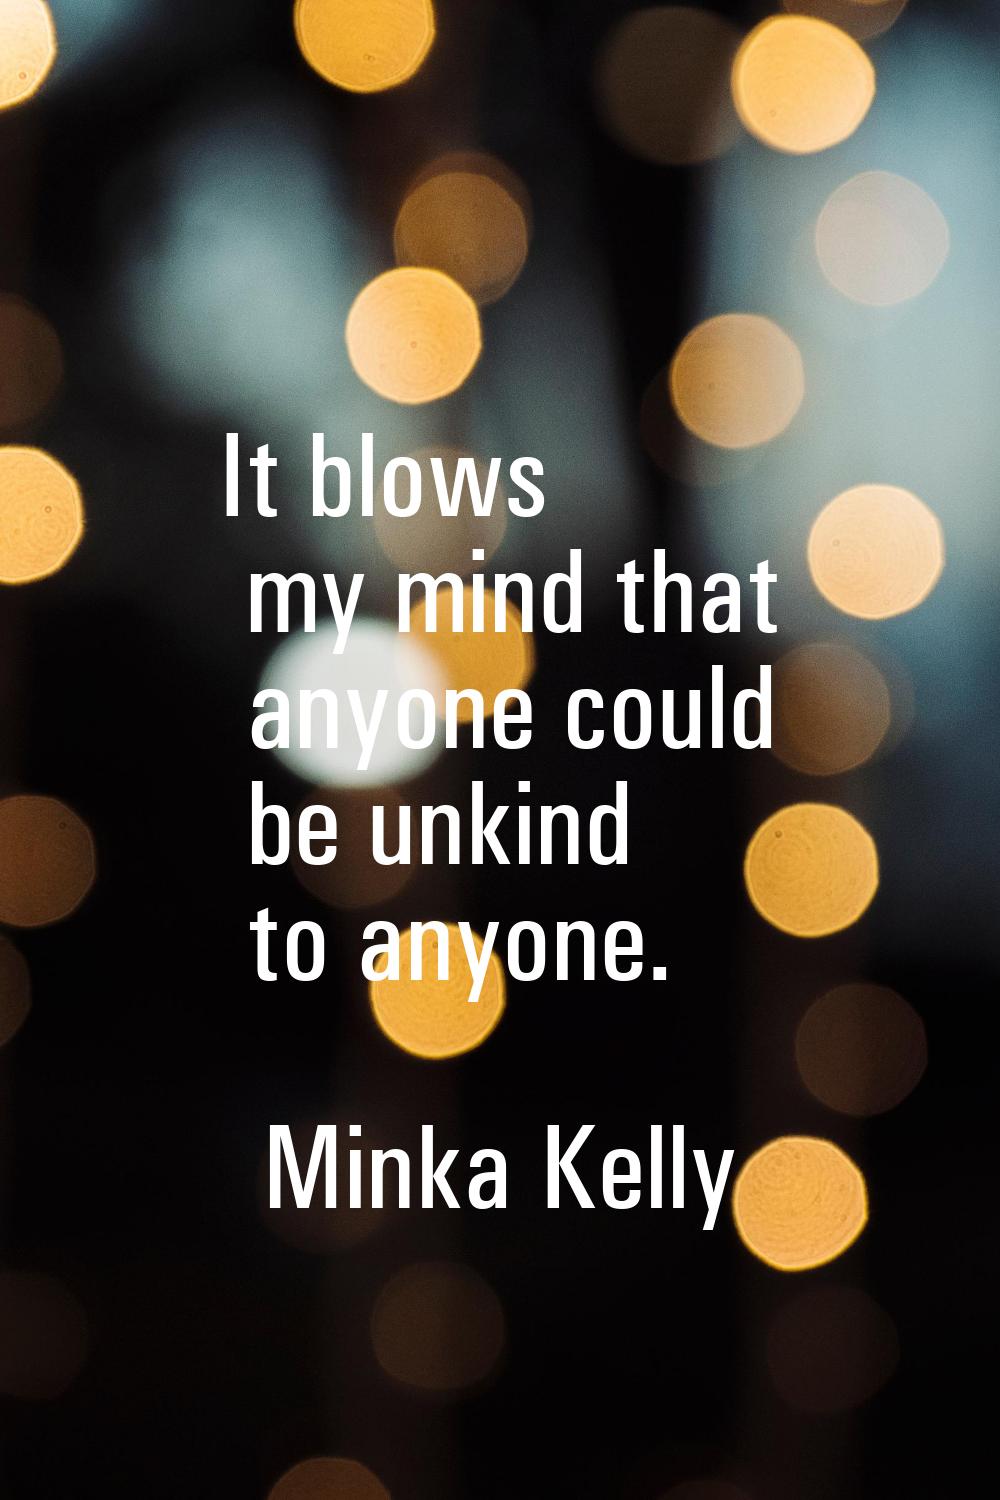 It blows my mind that anyone could be unkind to anyone.